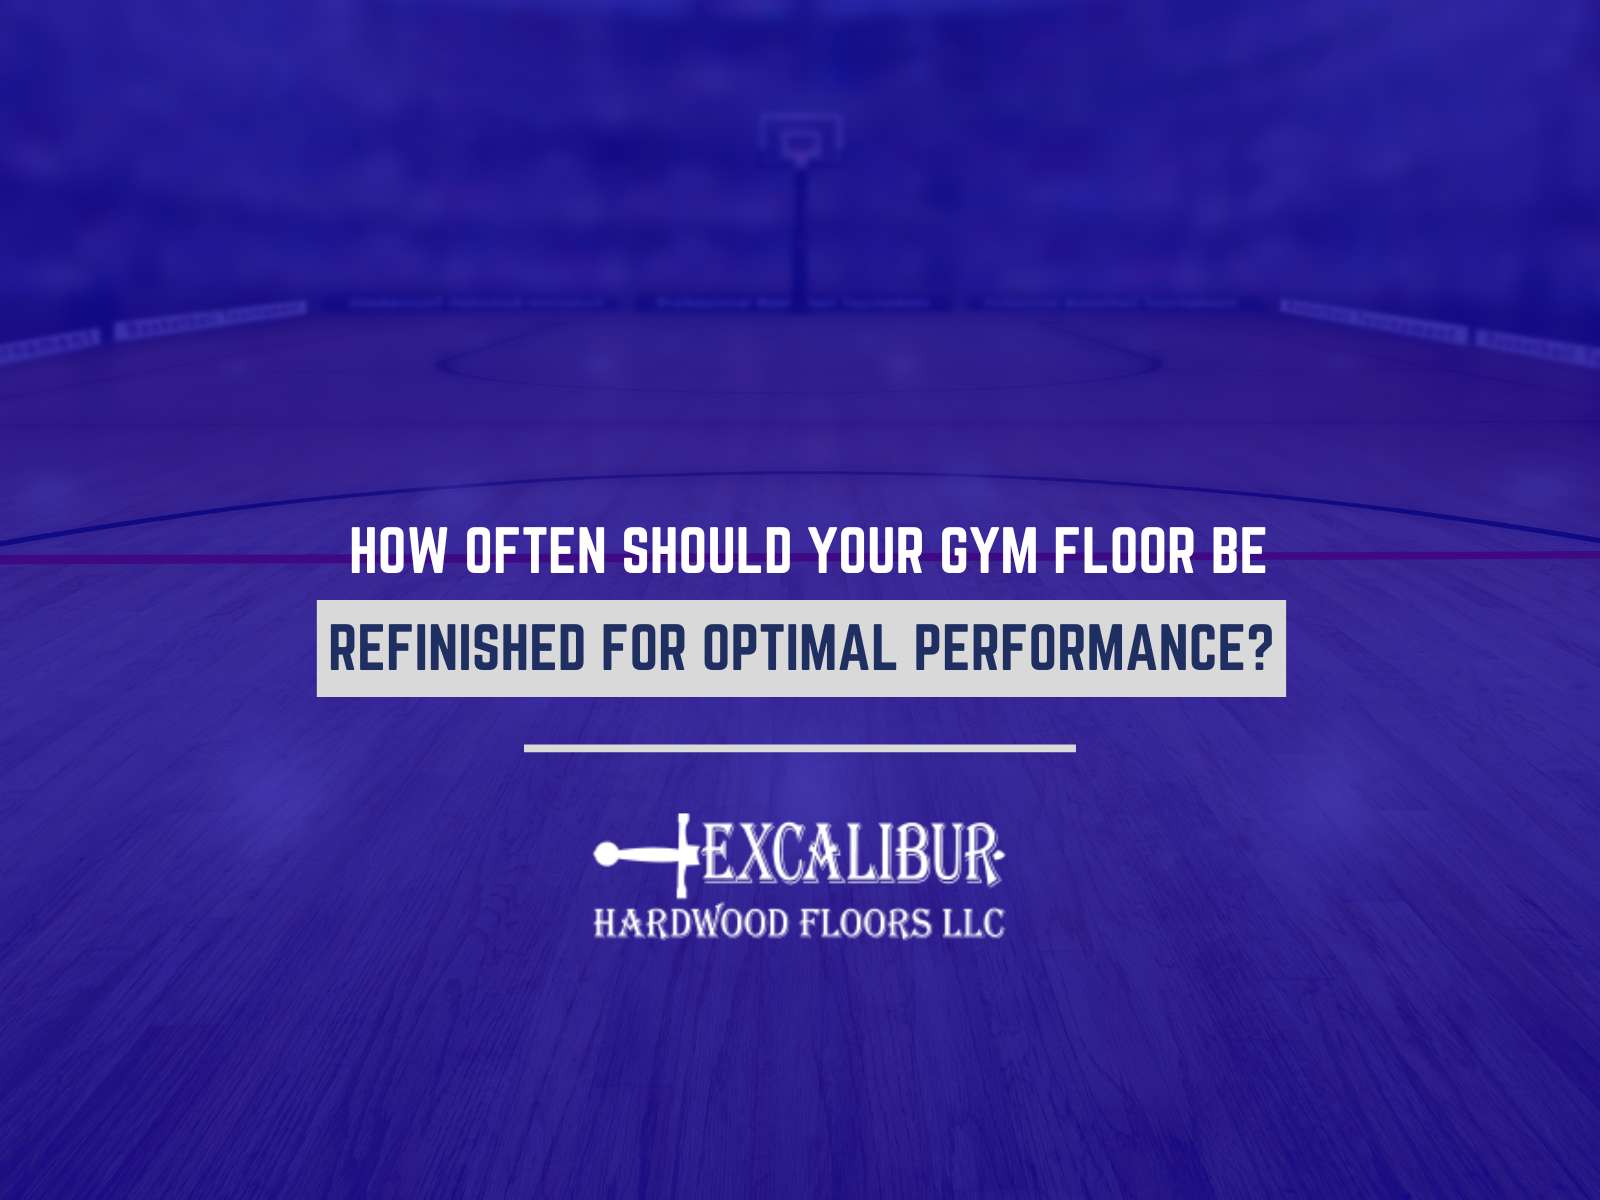 How Often Should Your Gym Floor Be Refinished For Optimal Performance?